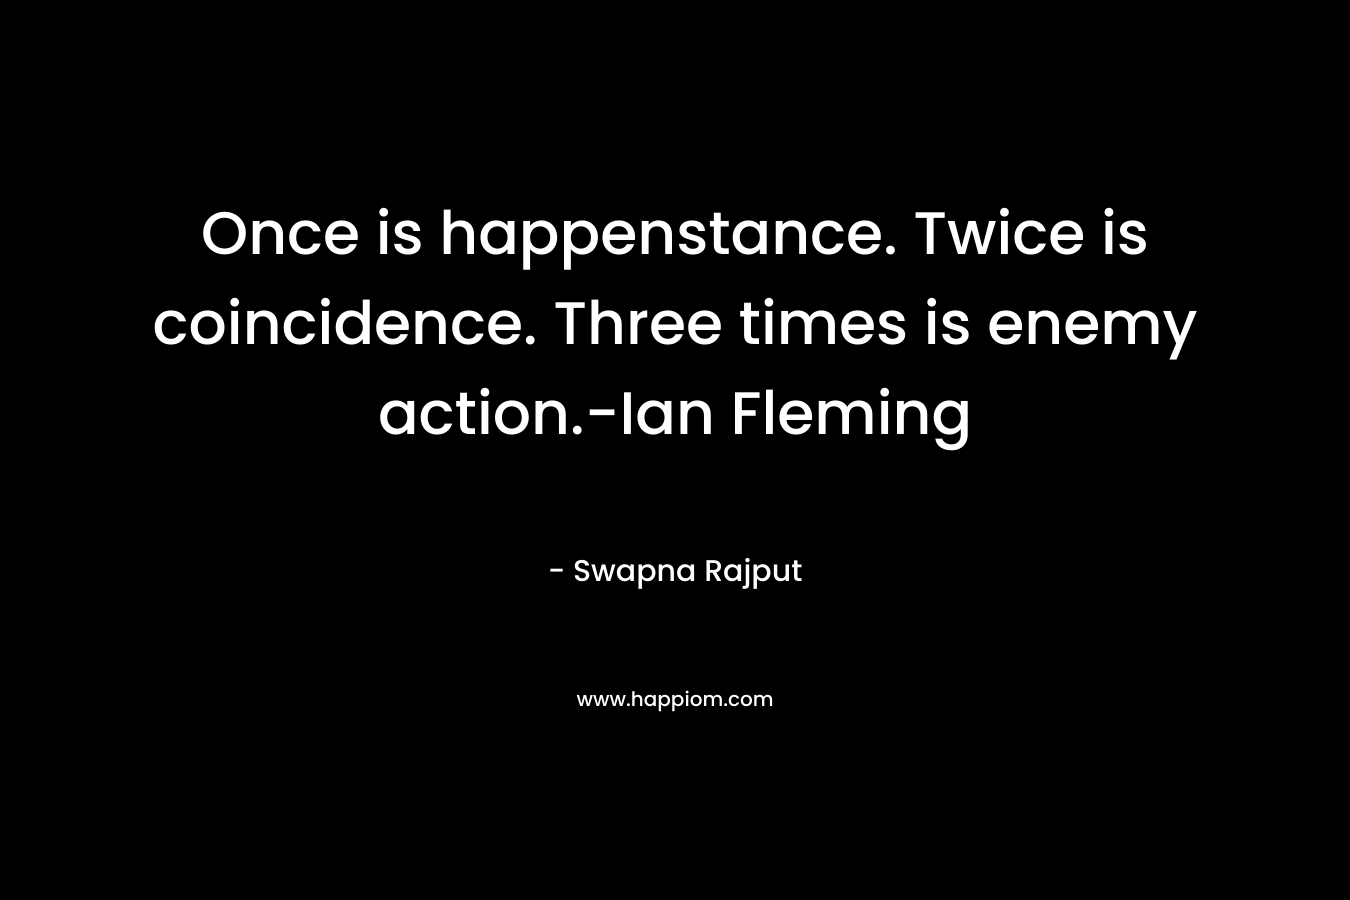 Once is happenstance. Twice is coincidence. Three times is enemy action.-Ian Fleming – Swapna Rajput